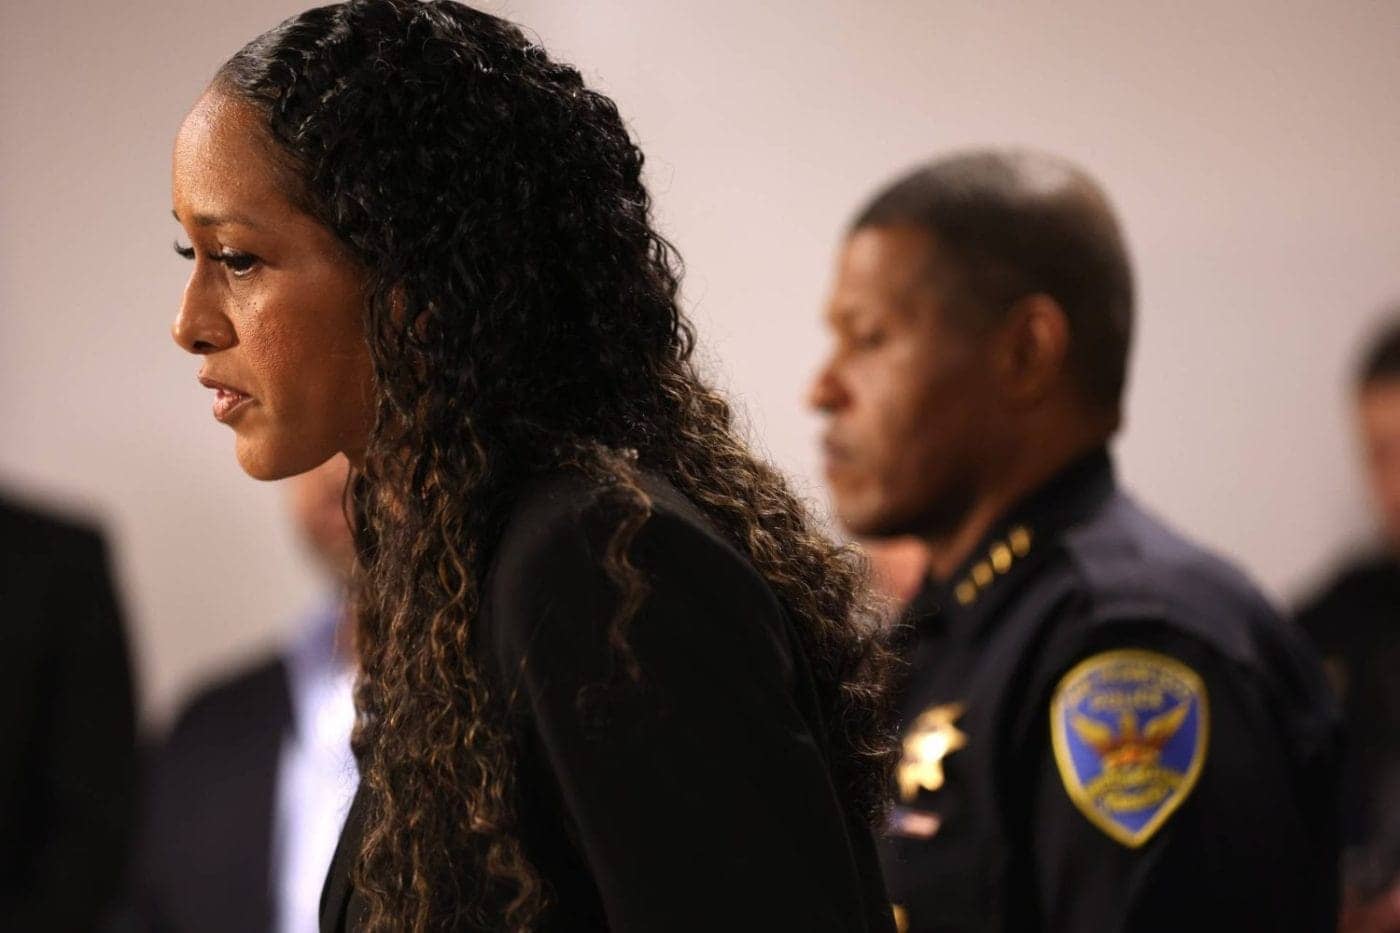 Brooke-Jenkins-1400x933, <strong>Parlaying copaganda: The truth about San Francisco’s District Attorney and her attempts to coddle killer police</strong>, Local News & Views News & Views 